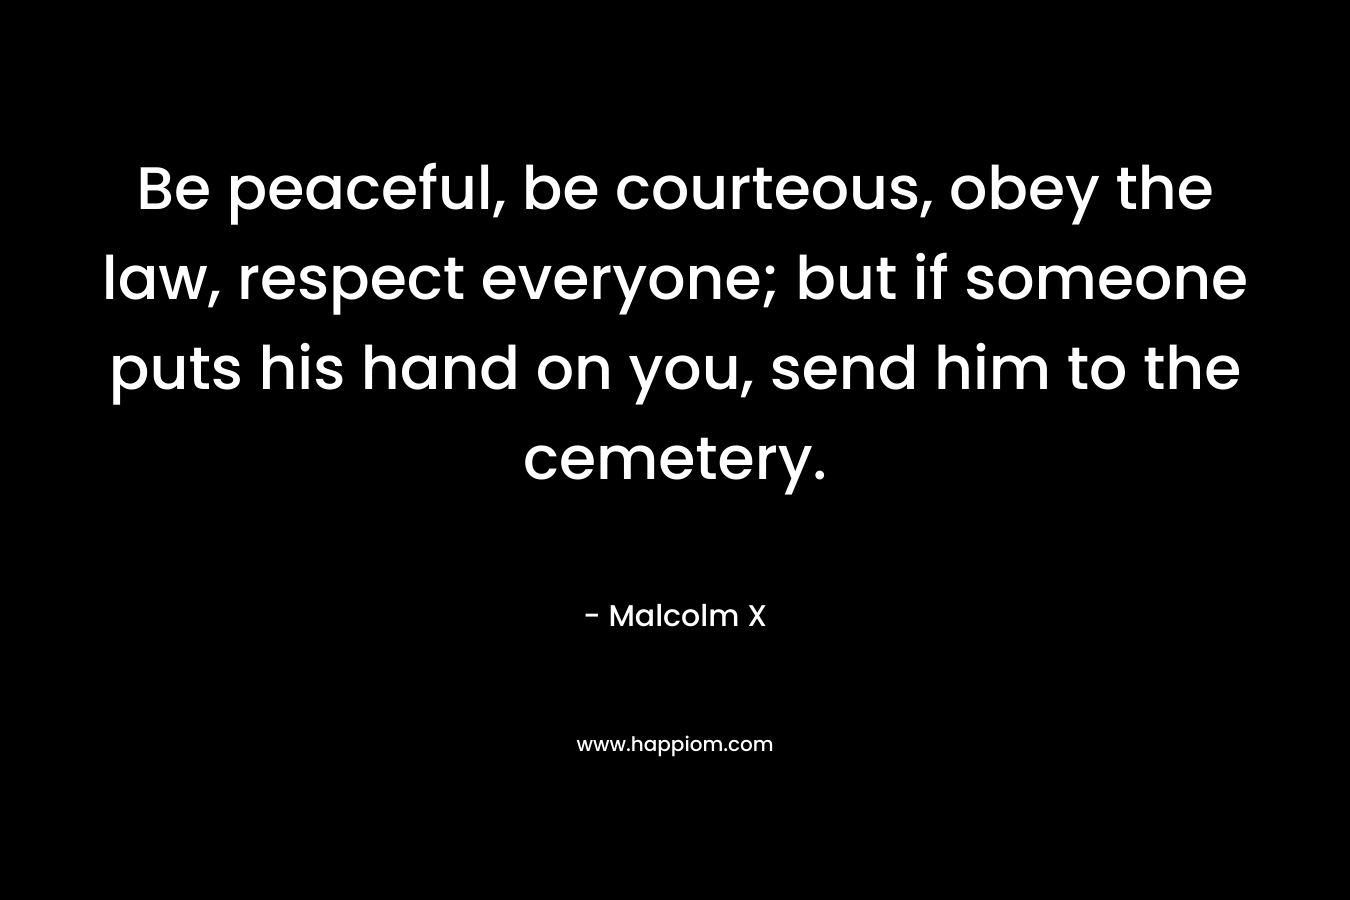 Be peaceful, be courteous, obey the law, respect everyone; but if someone puts his hand on you, send him to the cemetery. – Malcolm X